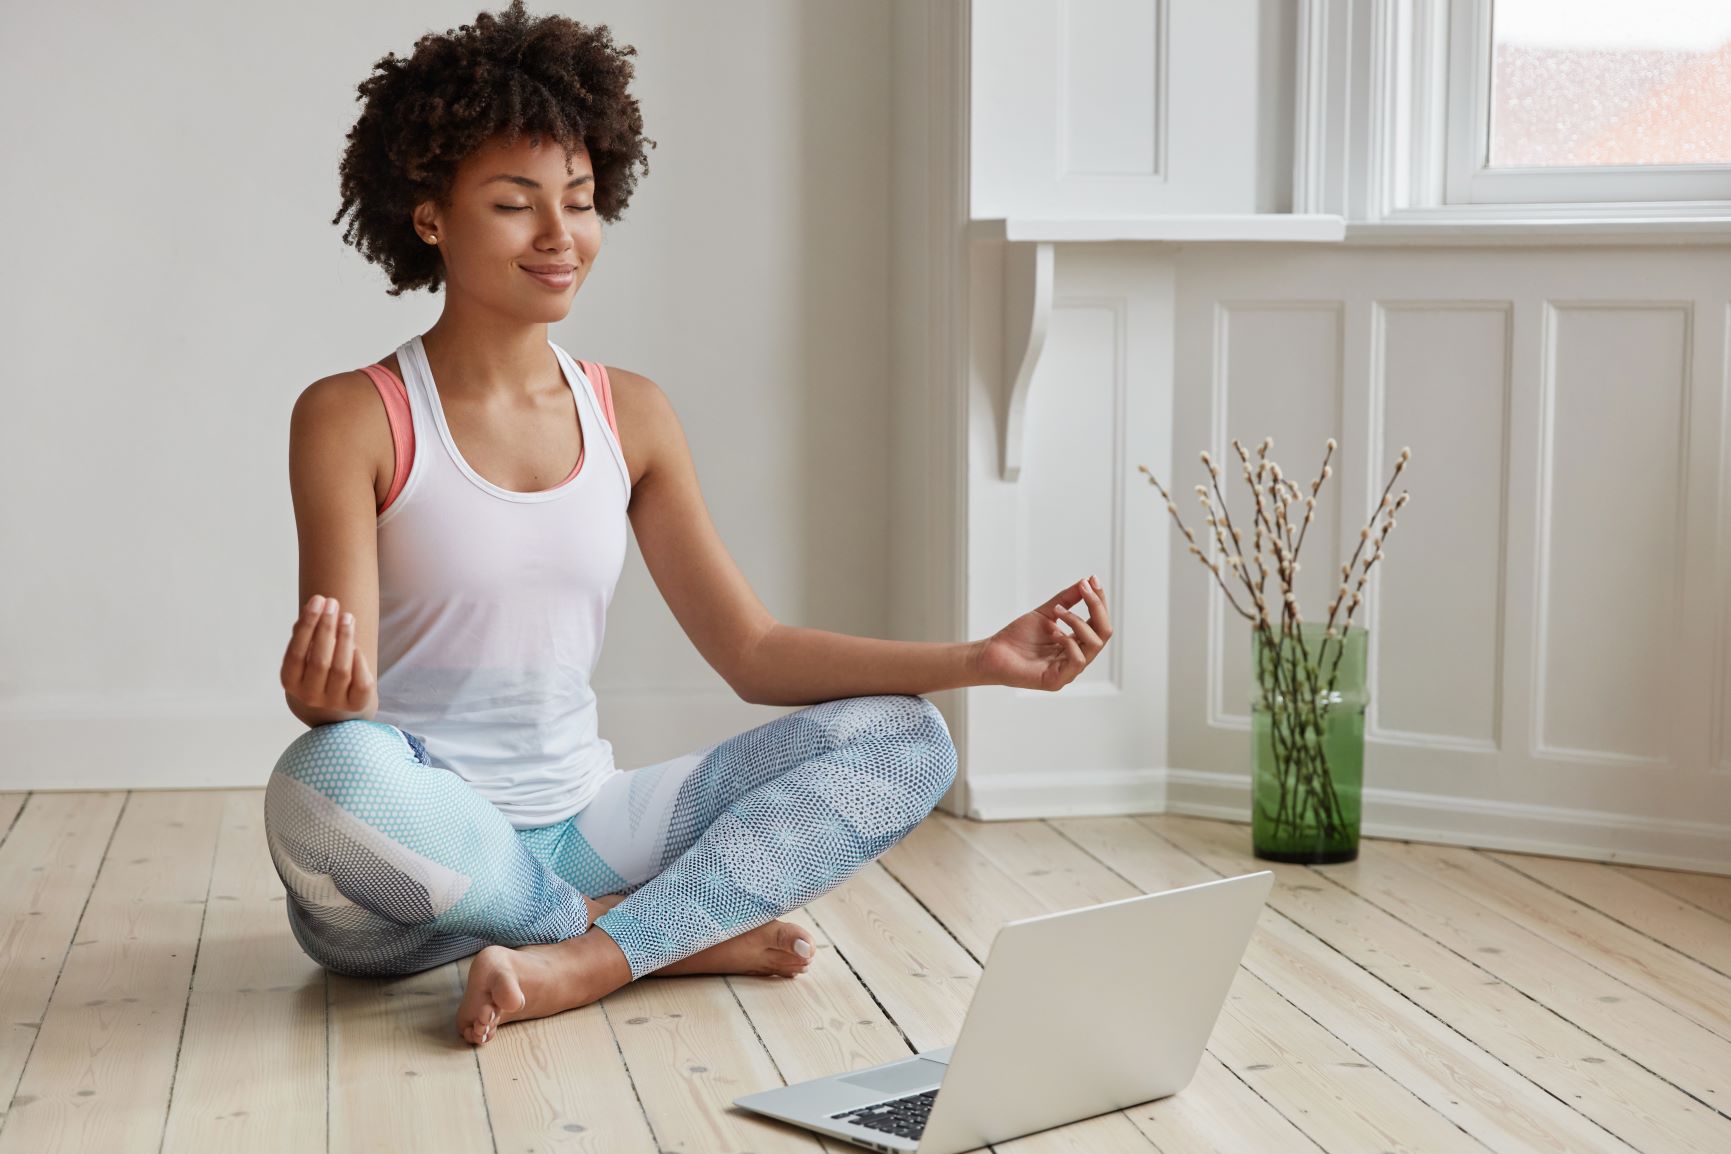 A lady sat meditating in front of her laptop